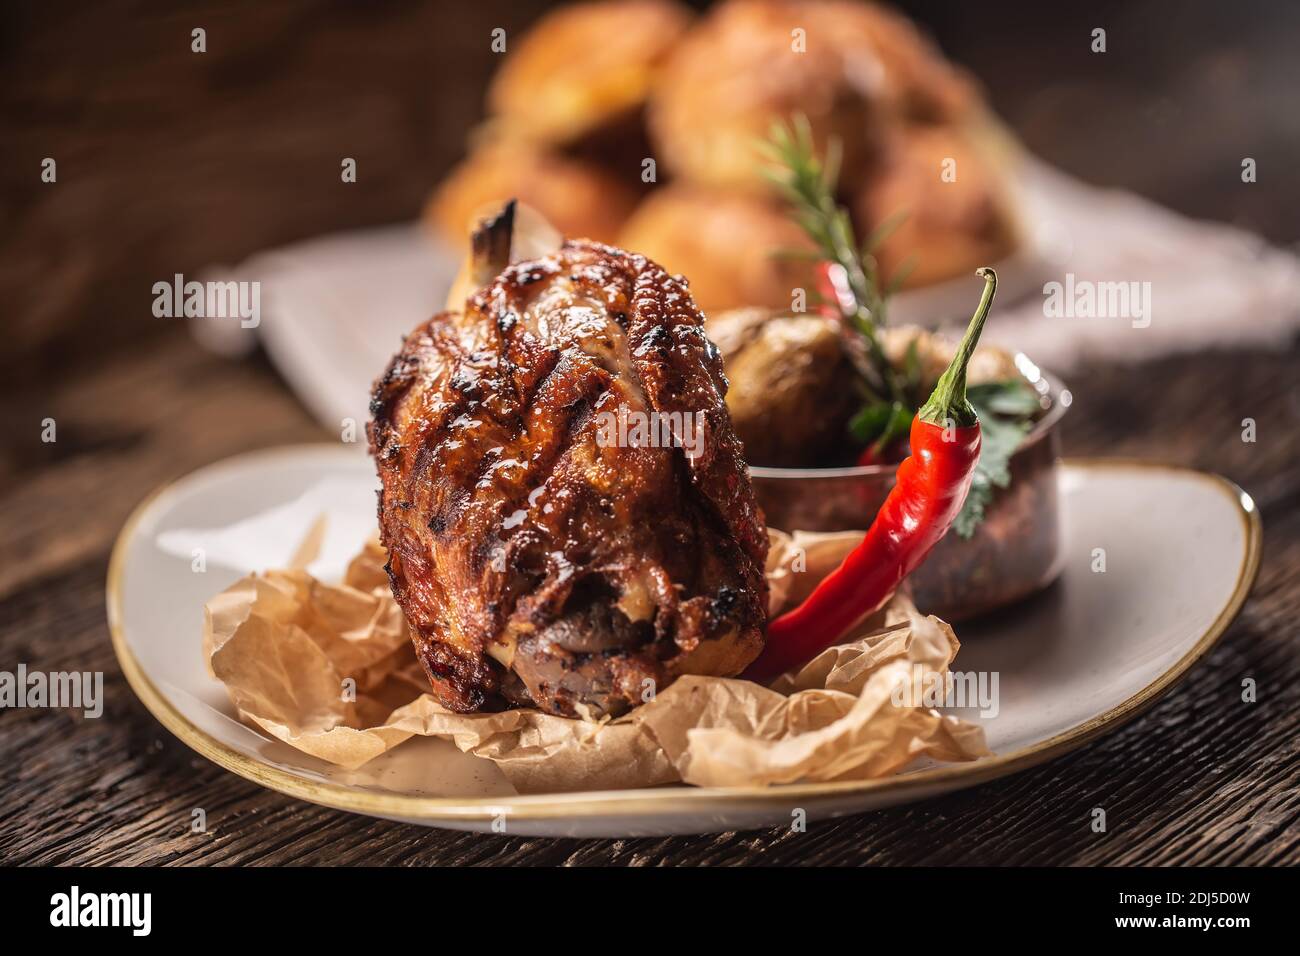 Ham hock baked with potatoes and served with a chilli with a rustic wooden background. Stock Photo